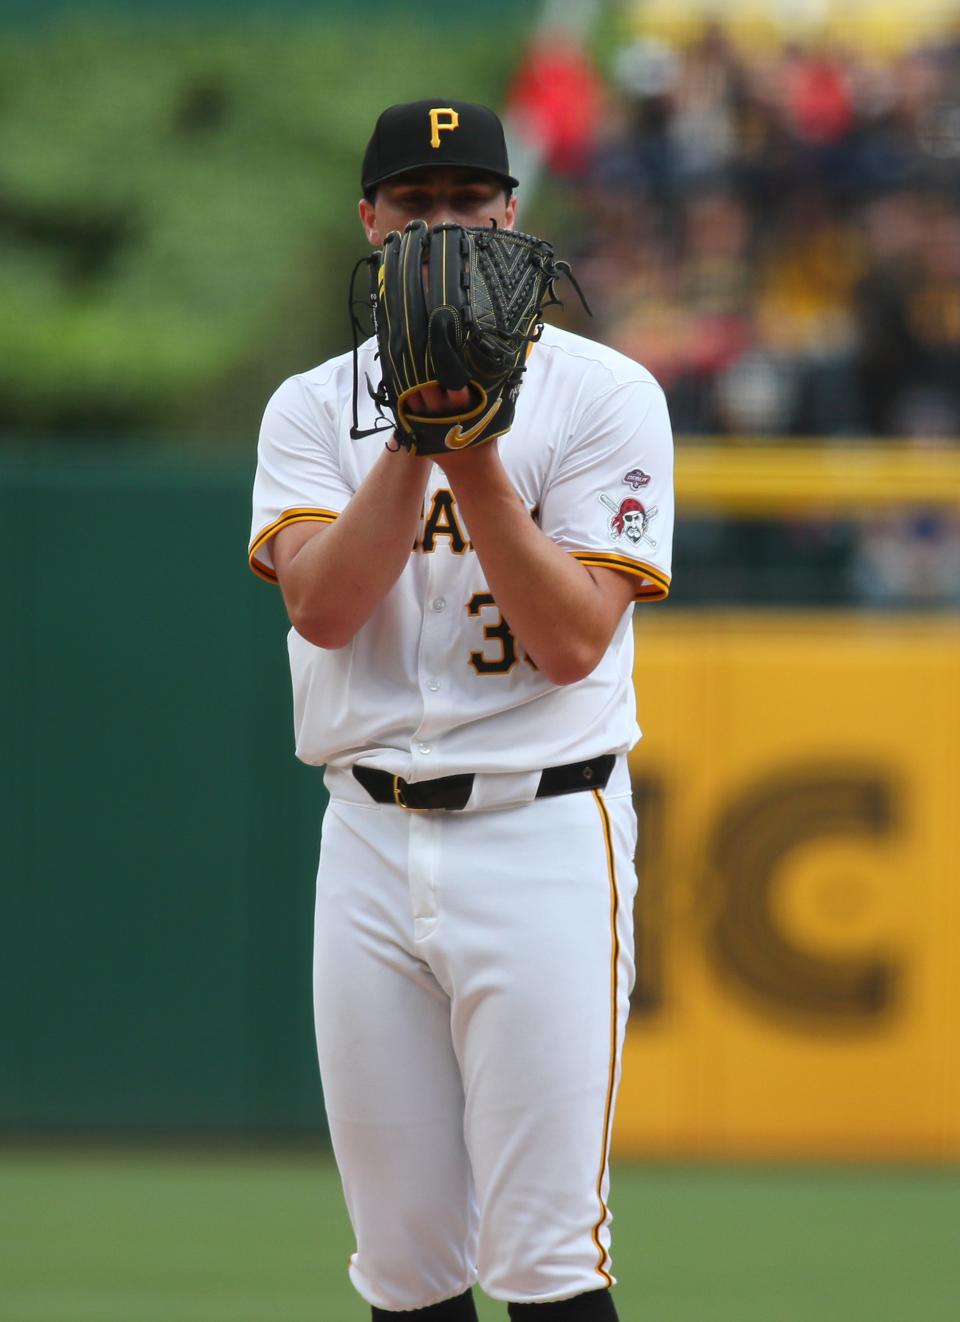 Pittsburgh Pirates starting pitcher Paul Skenes (30) eyes up the batter prior to delivering a pitch during the first inning of his MLB Debut against the Chicago Cubs the Saturday evening at PNC Park in Pittsburgh, PA.